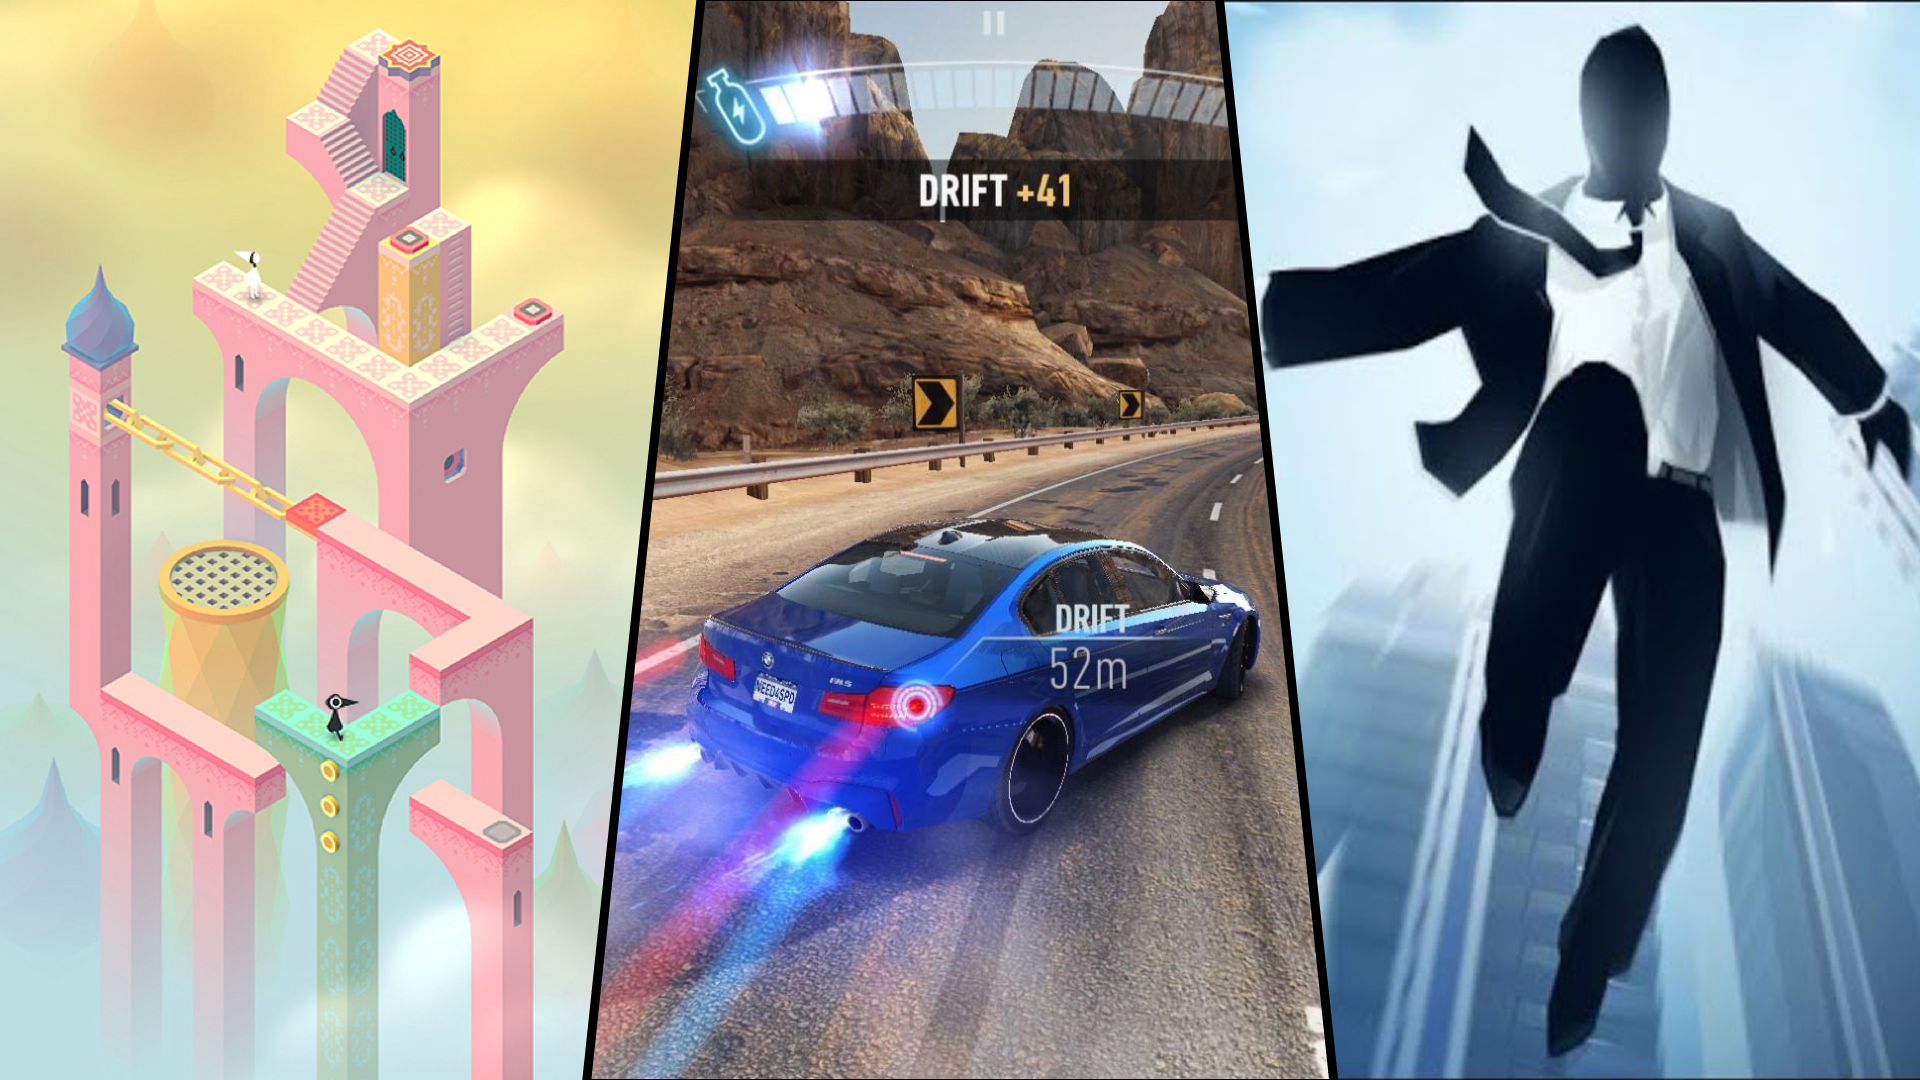 The Best iOS Games You Can Play Offline on Your iPhone or iPad